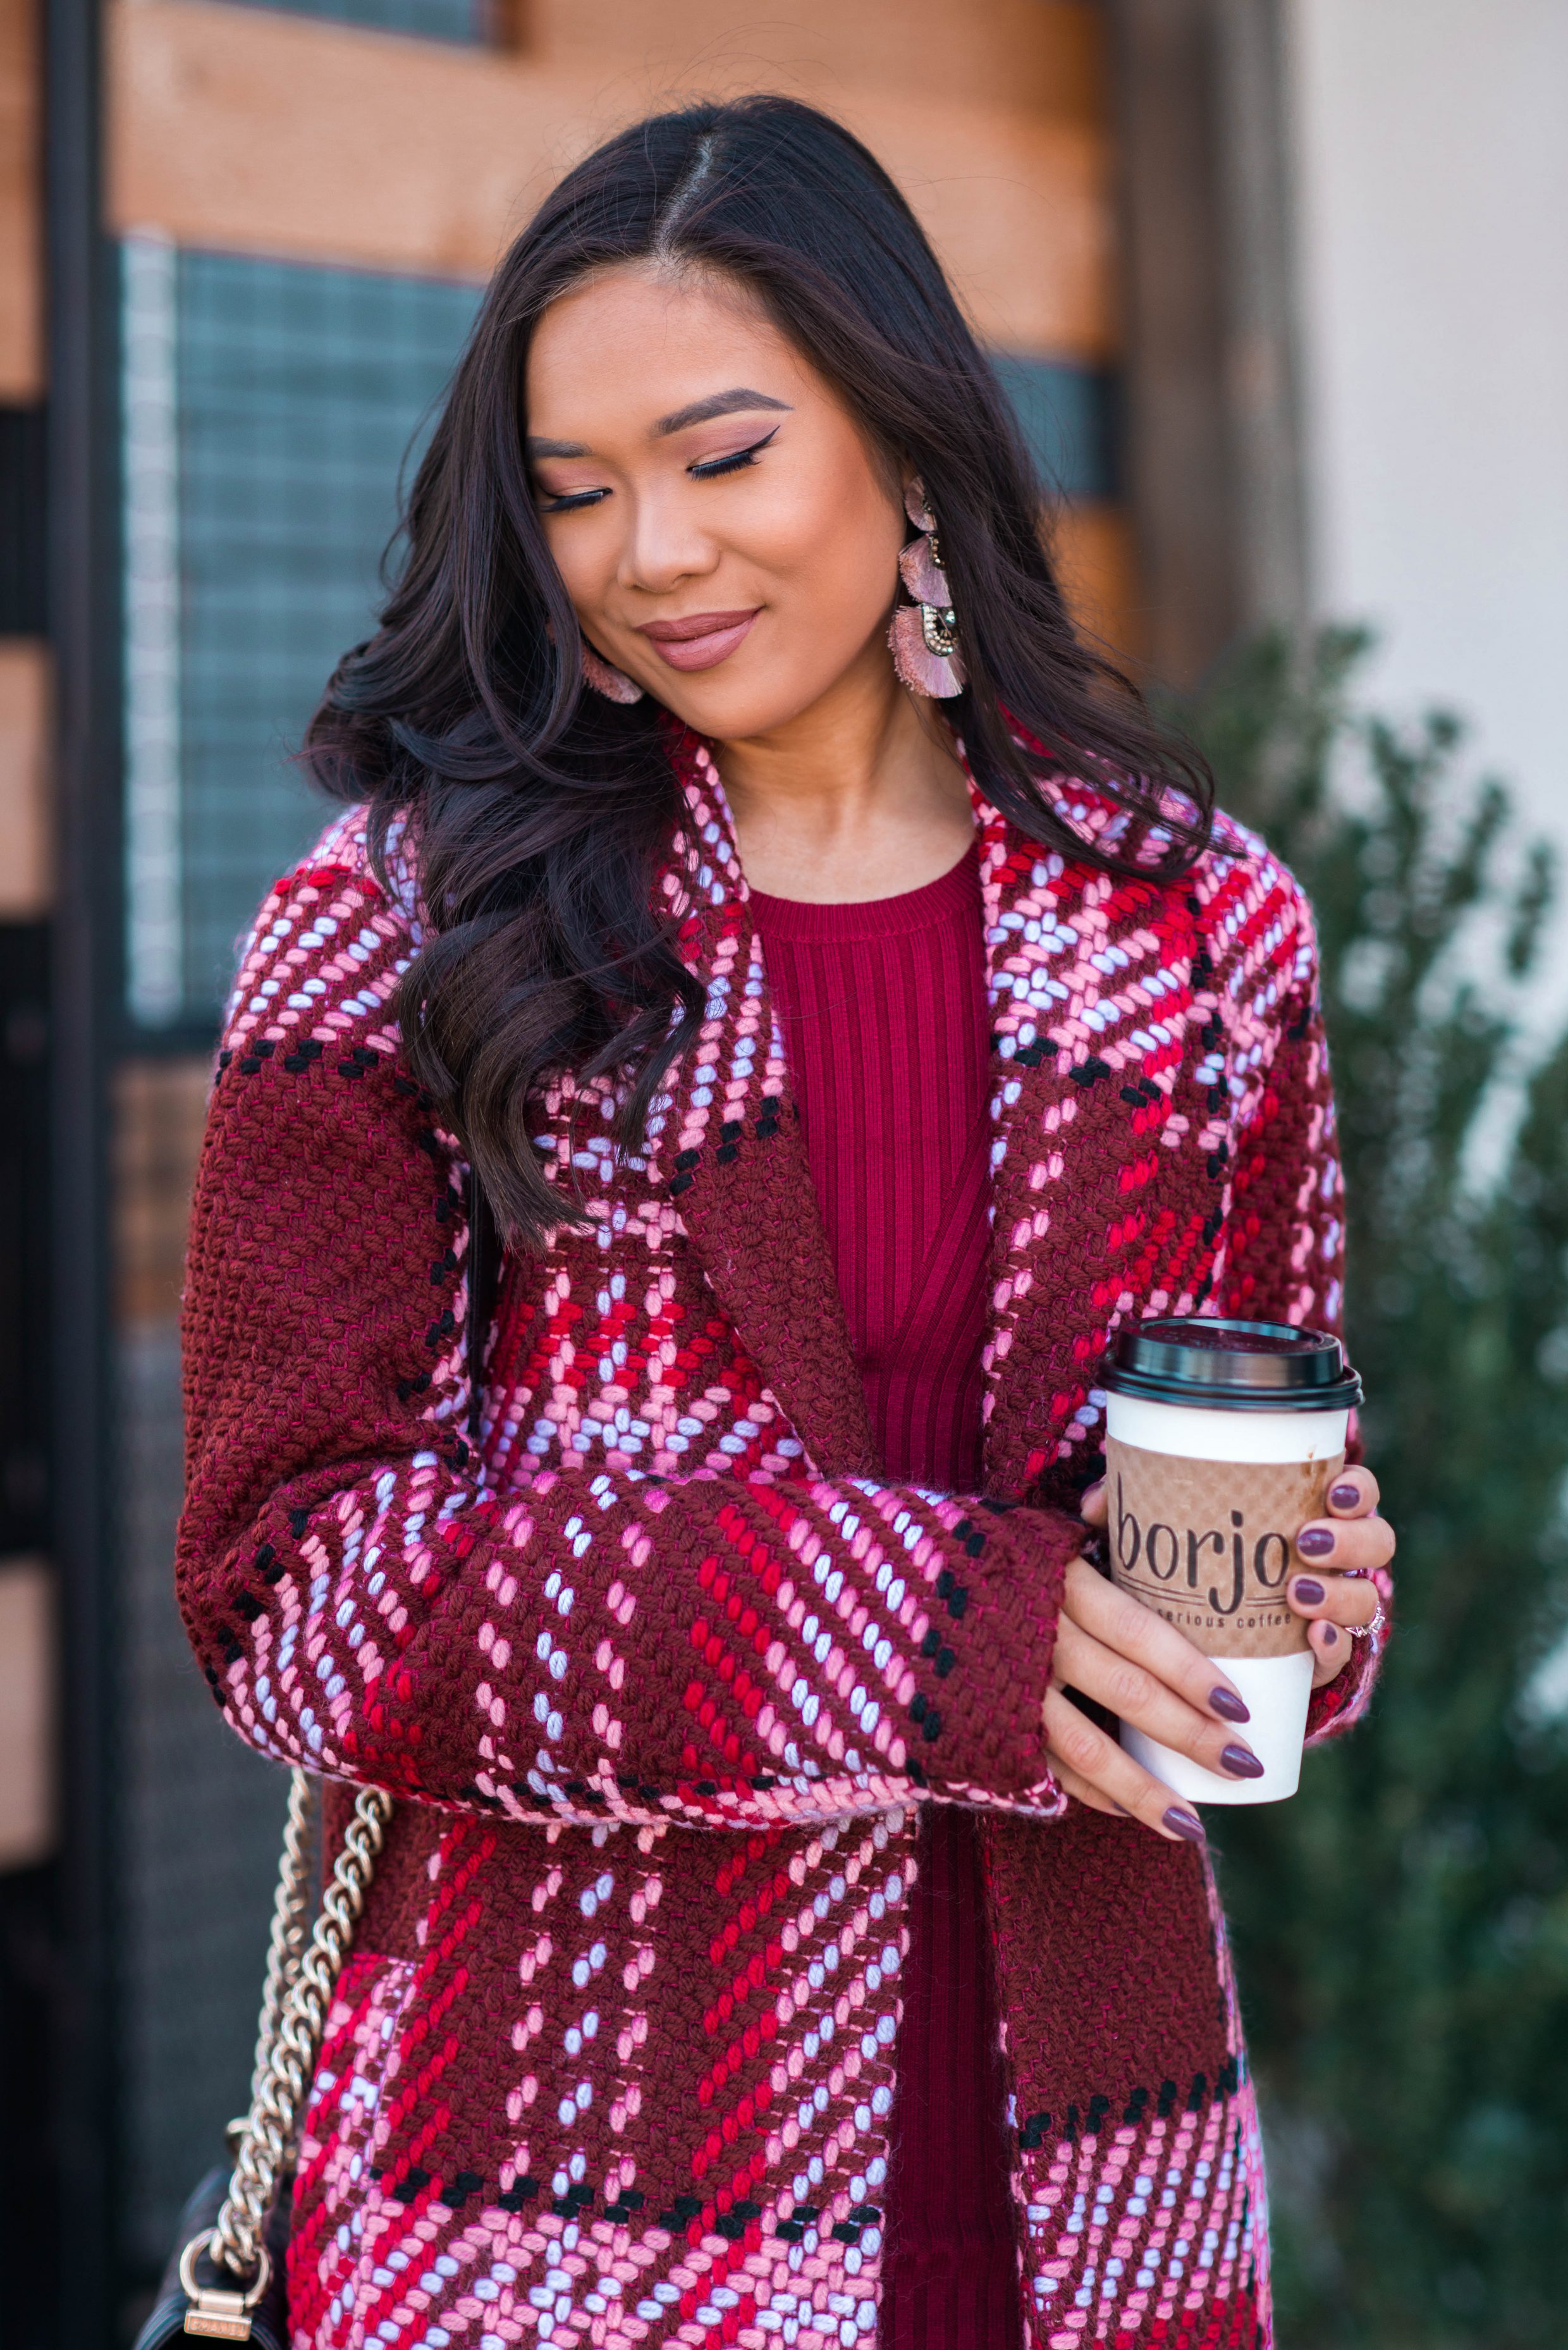 Blogger Hoang-Kim of ColorandChic.com styles a plaid statement coat for fall and winter